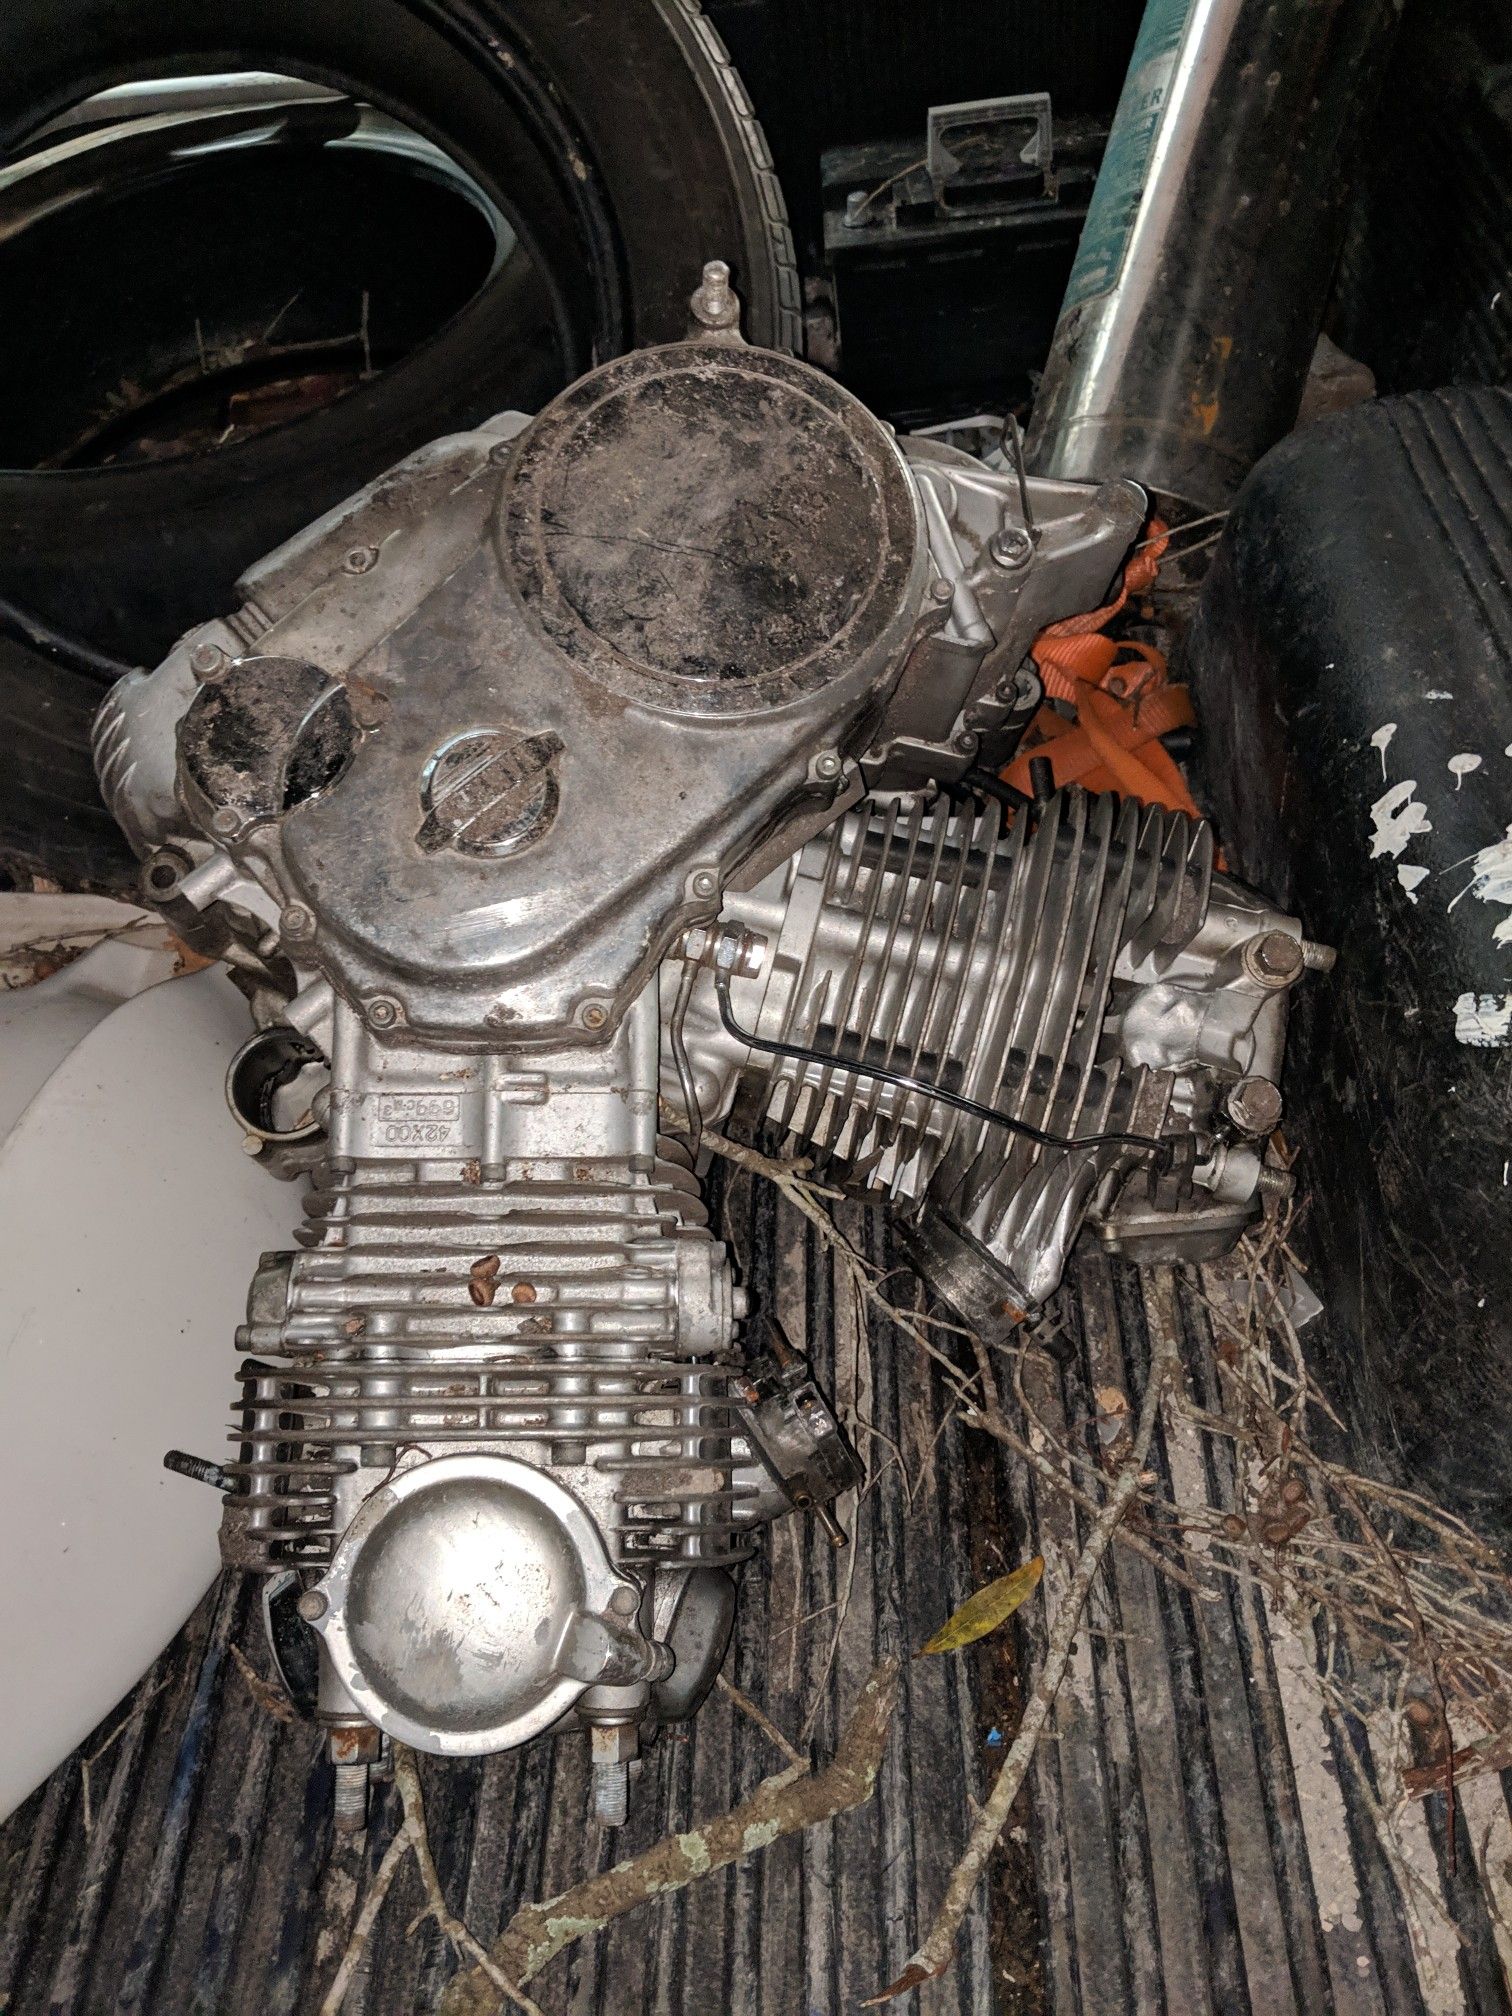 Yamaha motorcycle motor $25 need gone this wknd or going in trash